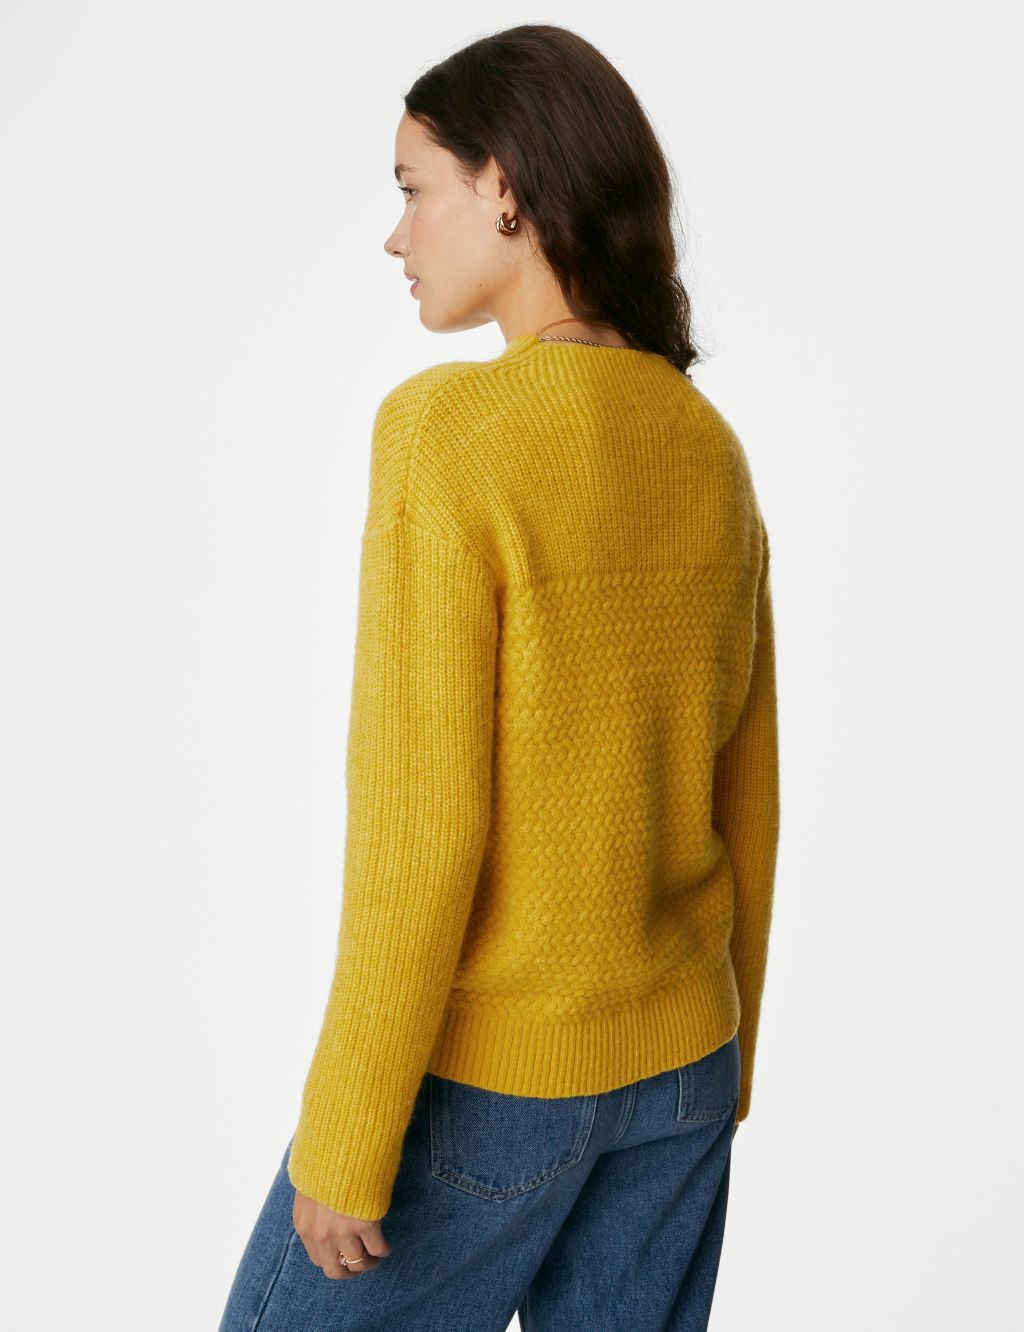 Funnel Neck Jumper with Wool image 5